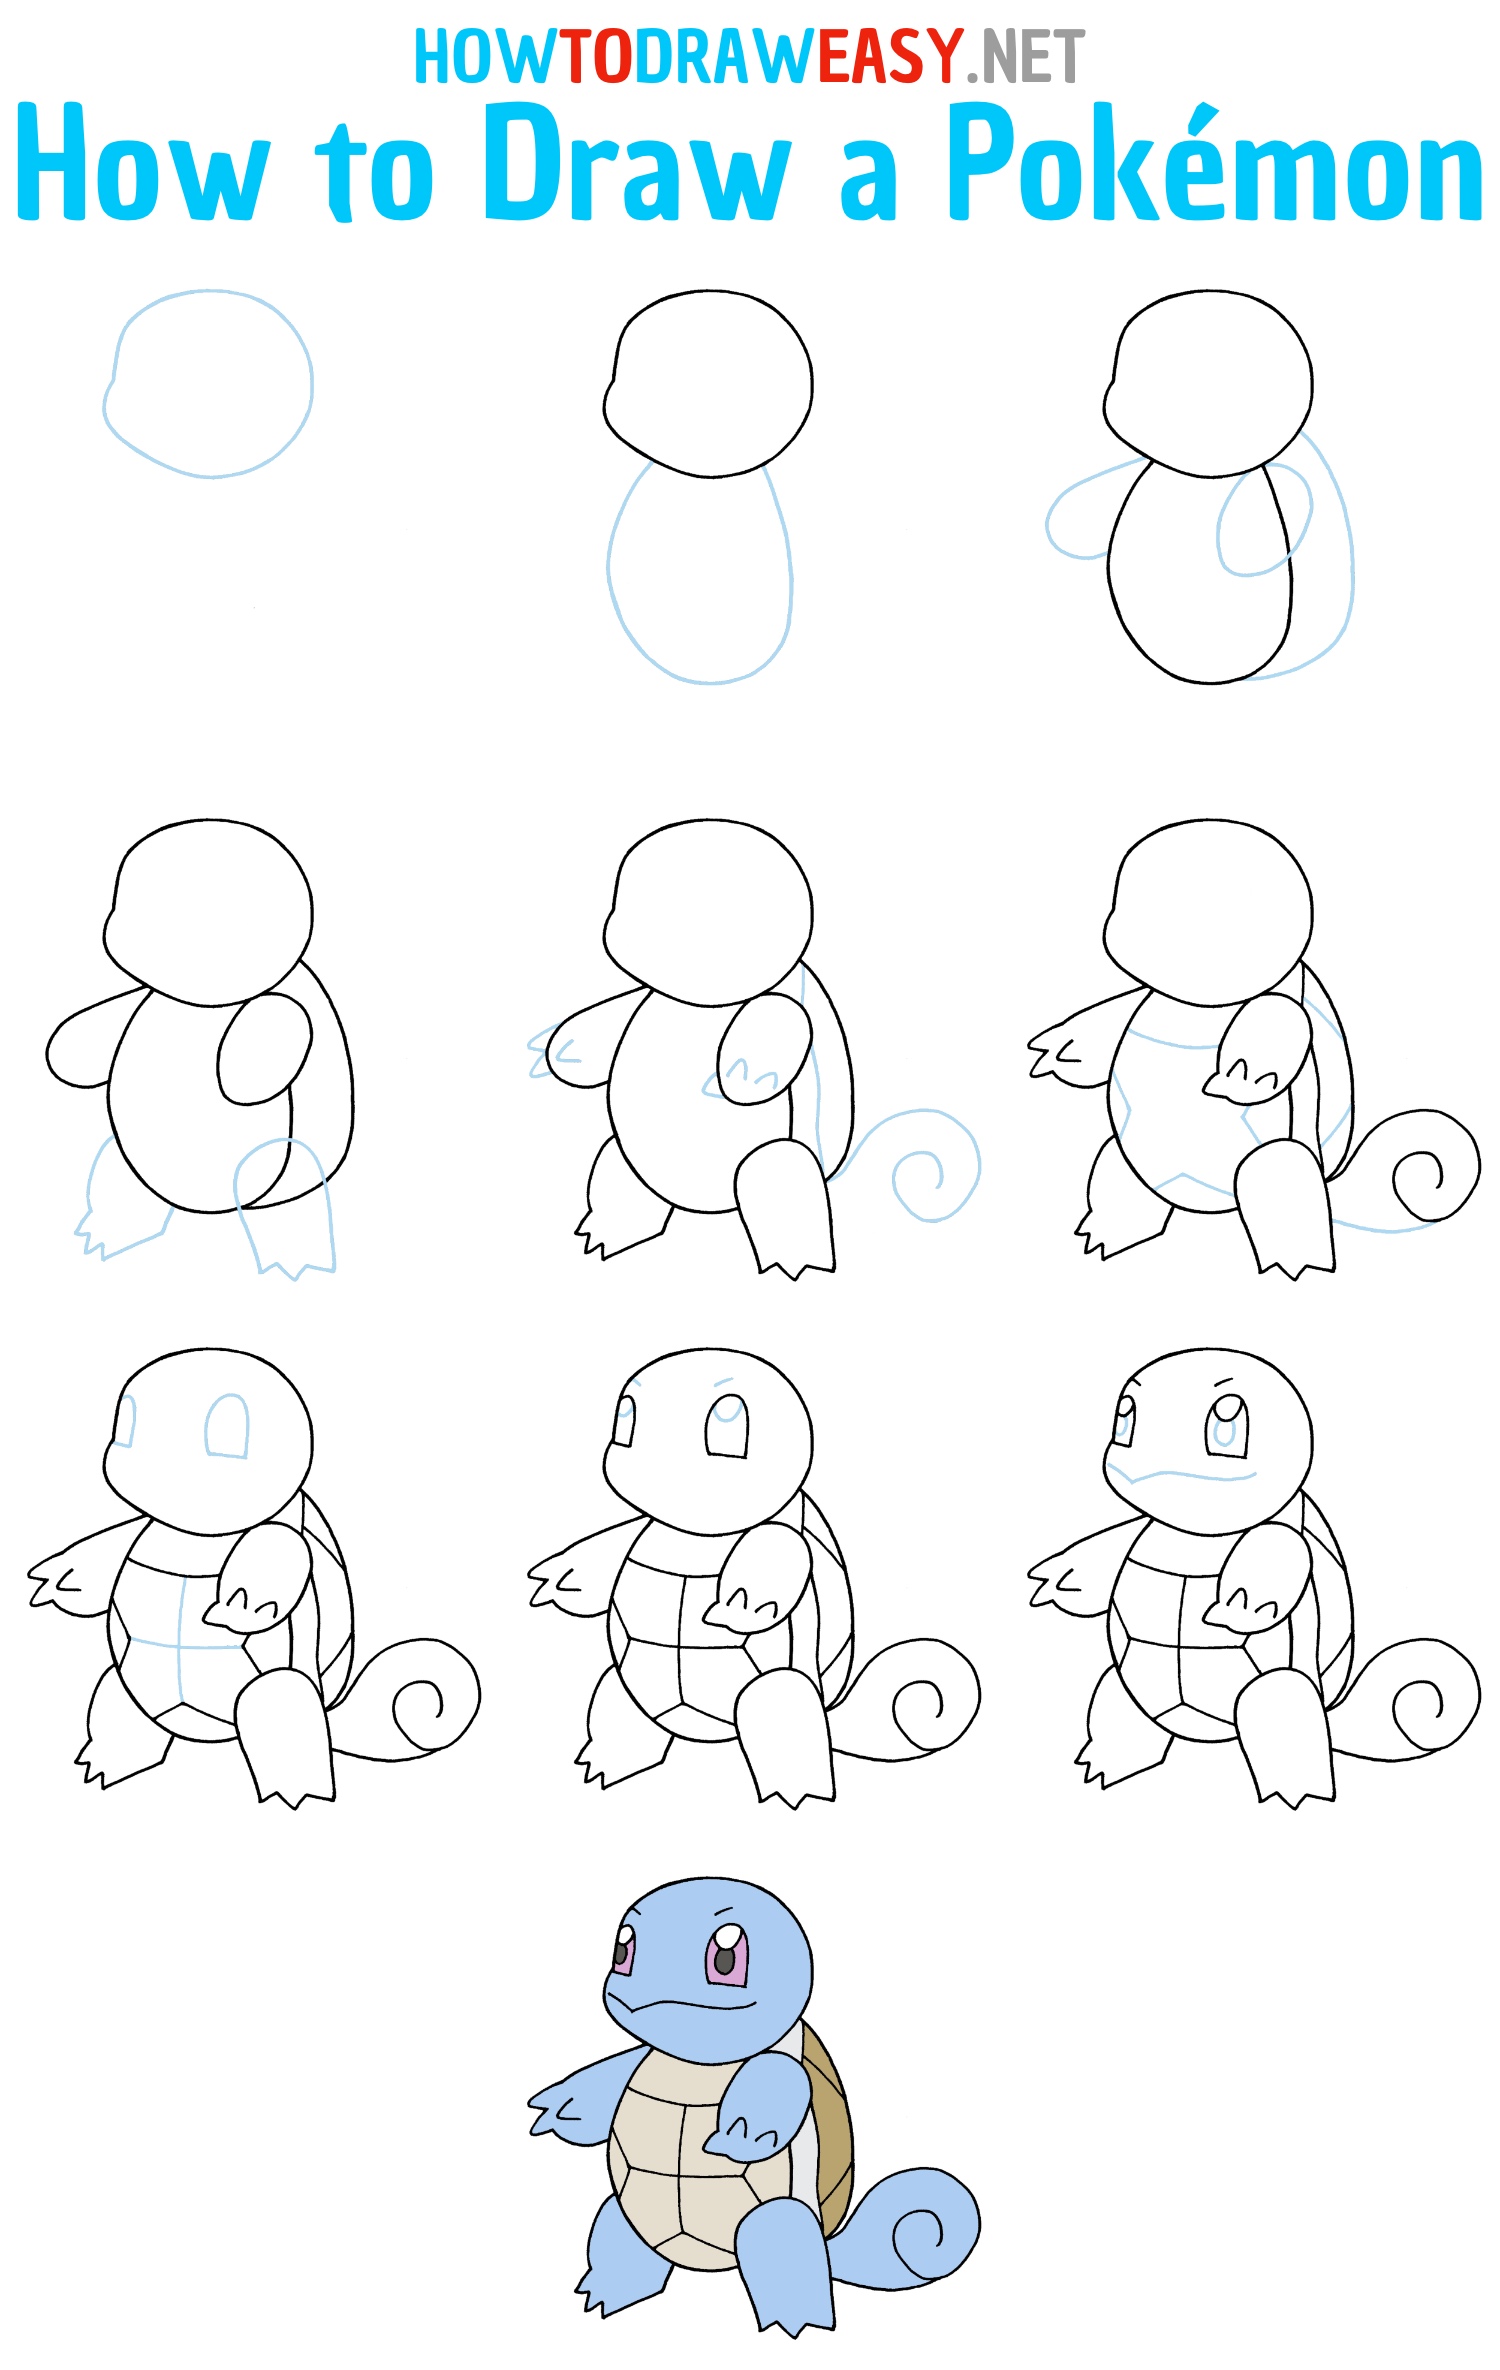 How to Draw a Pokemon Step by Step